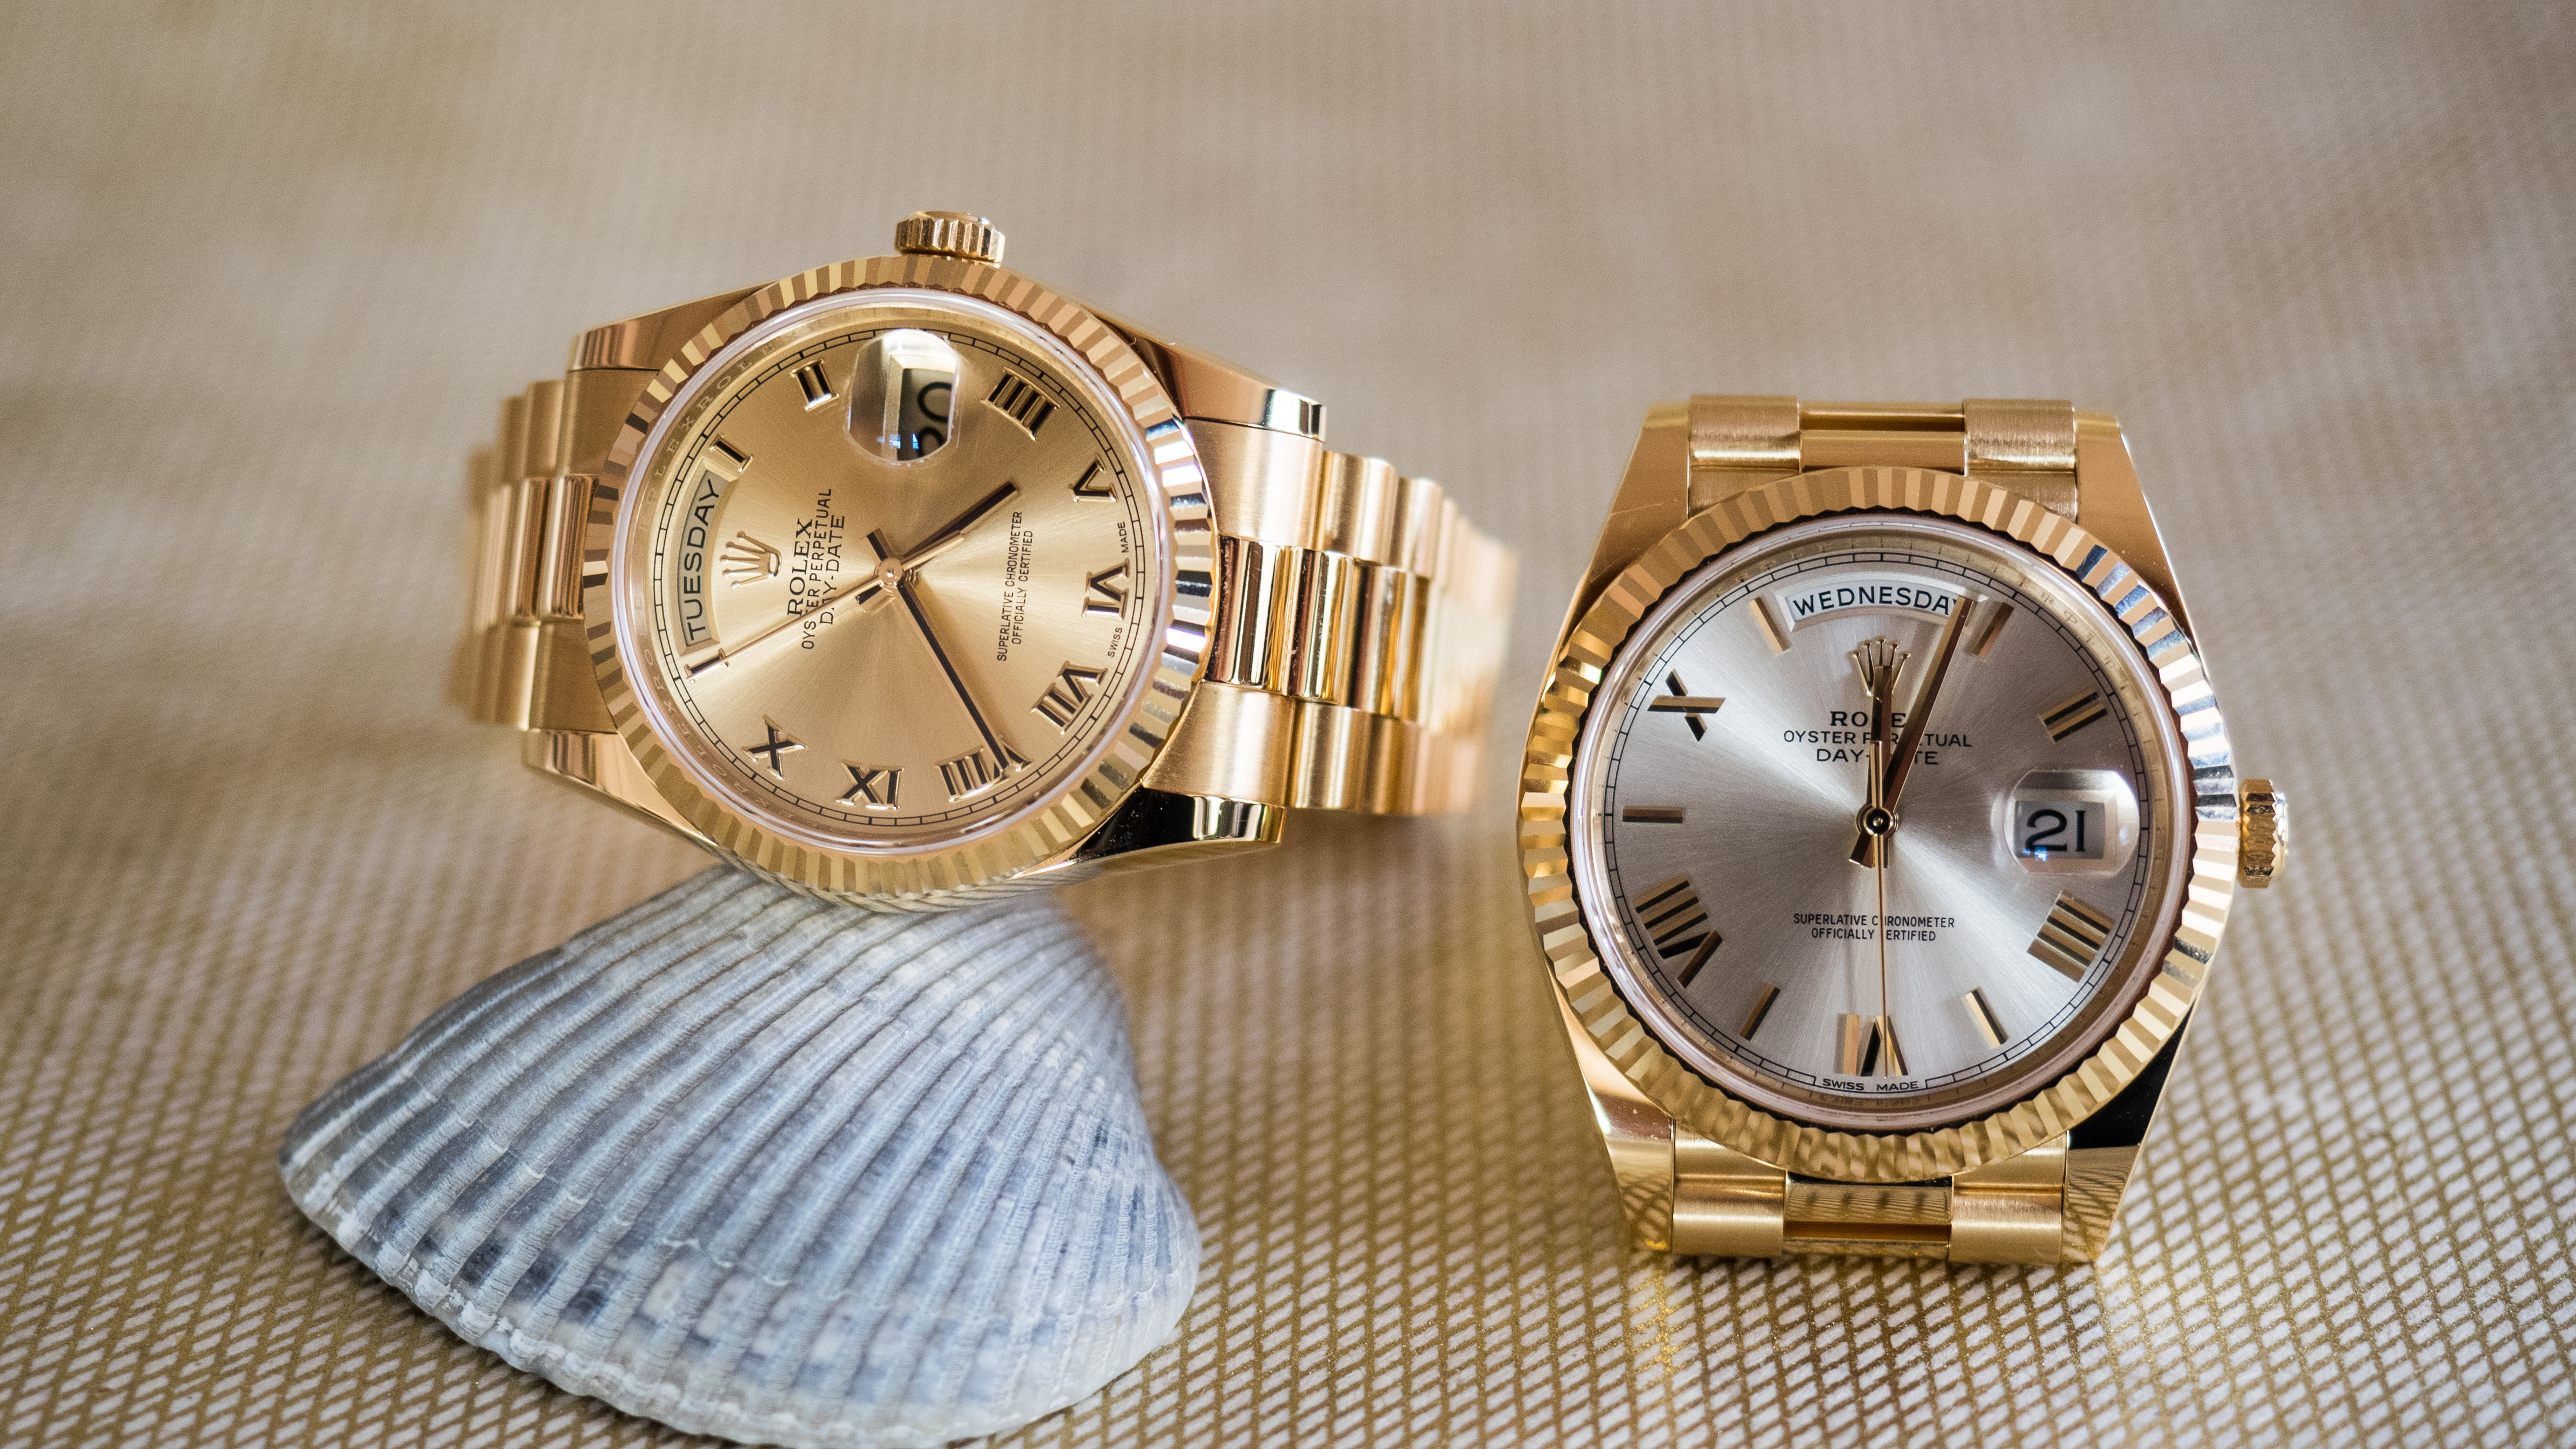 rolex day date 18238 review